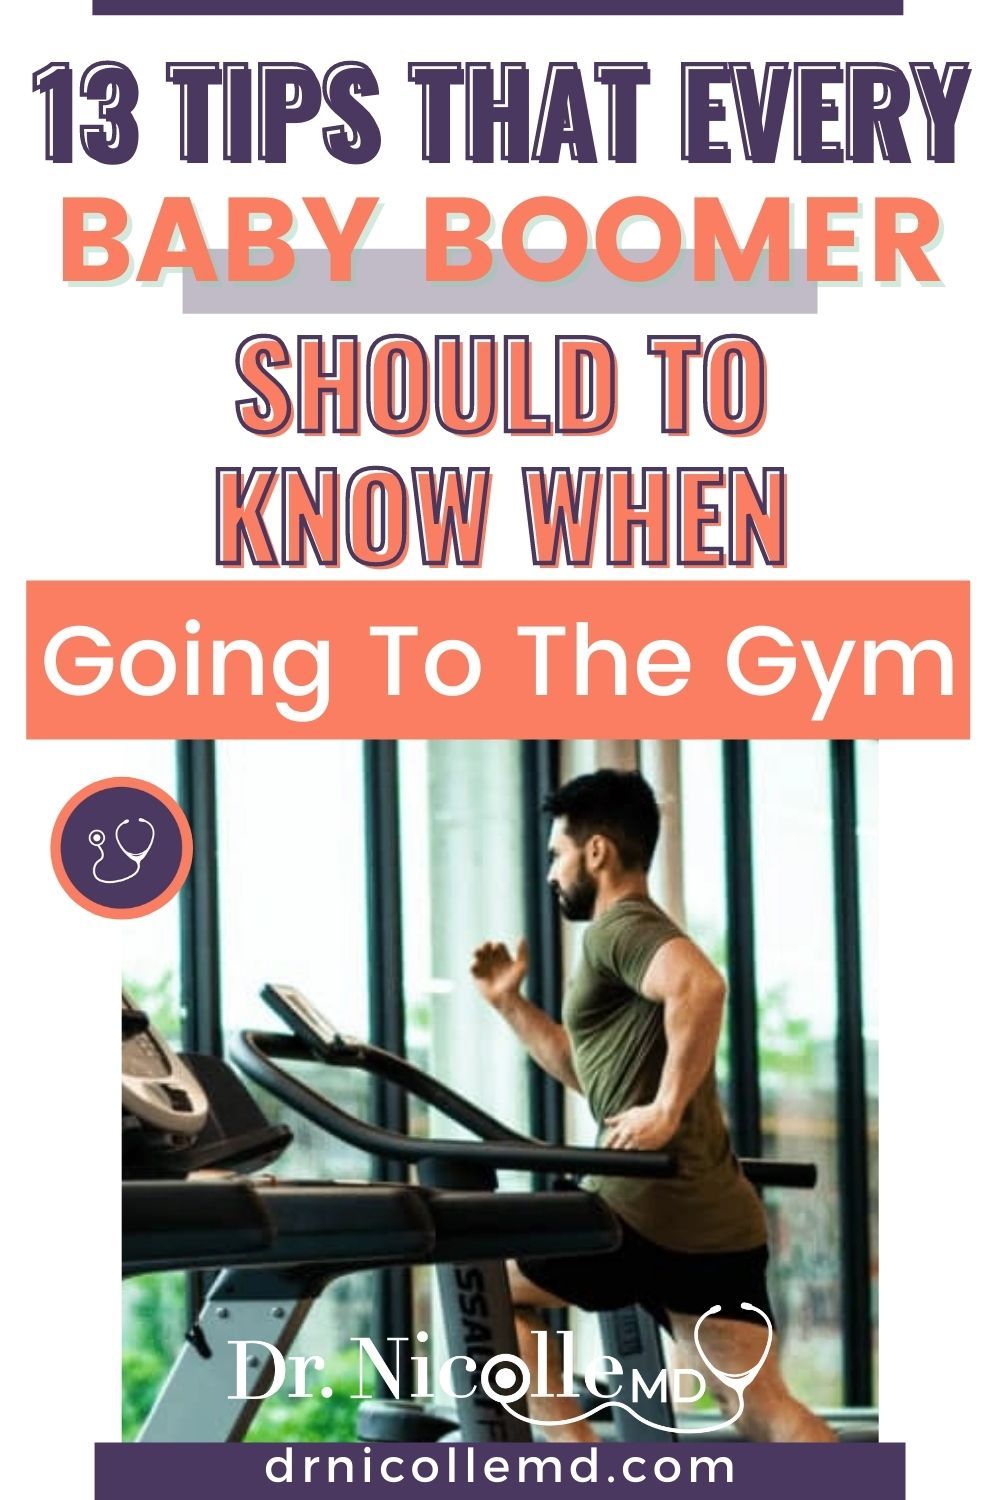 13 Tips That Every Baby Boomer Should to Know When Going To The Gym